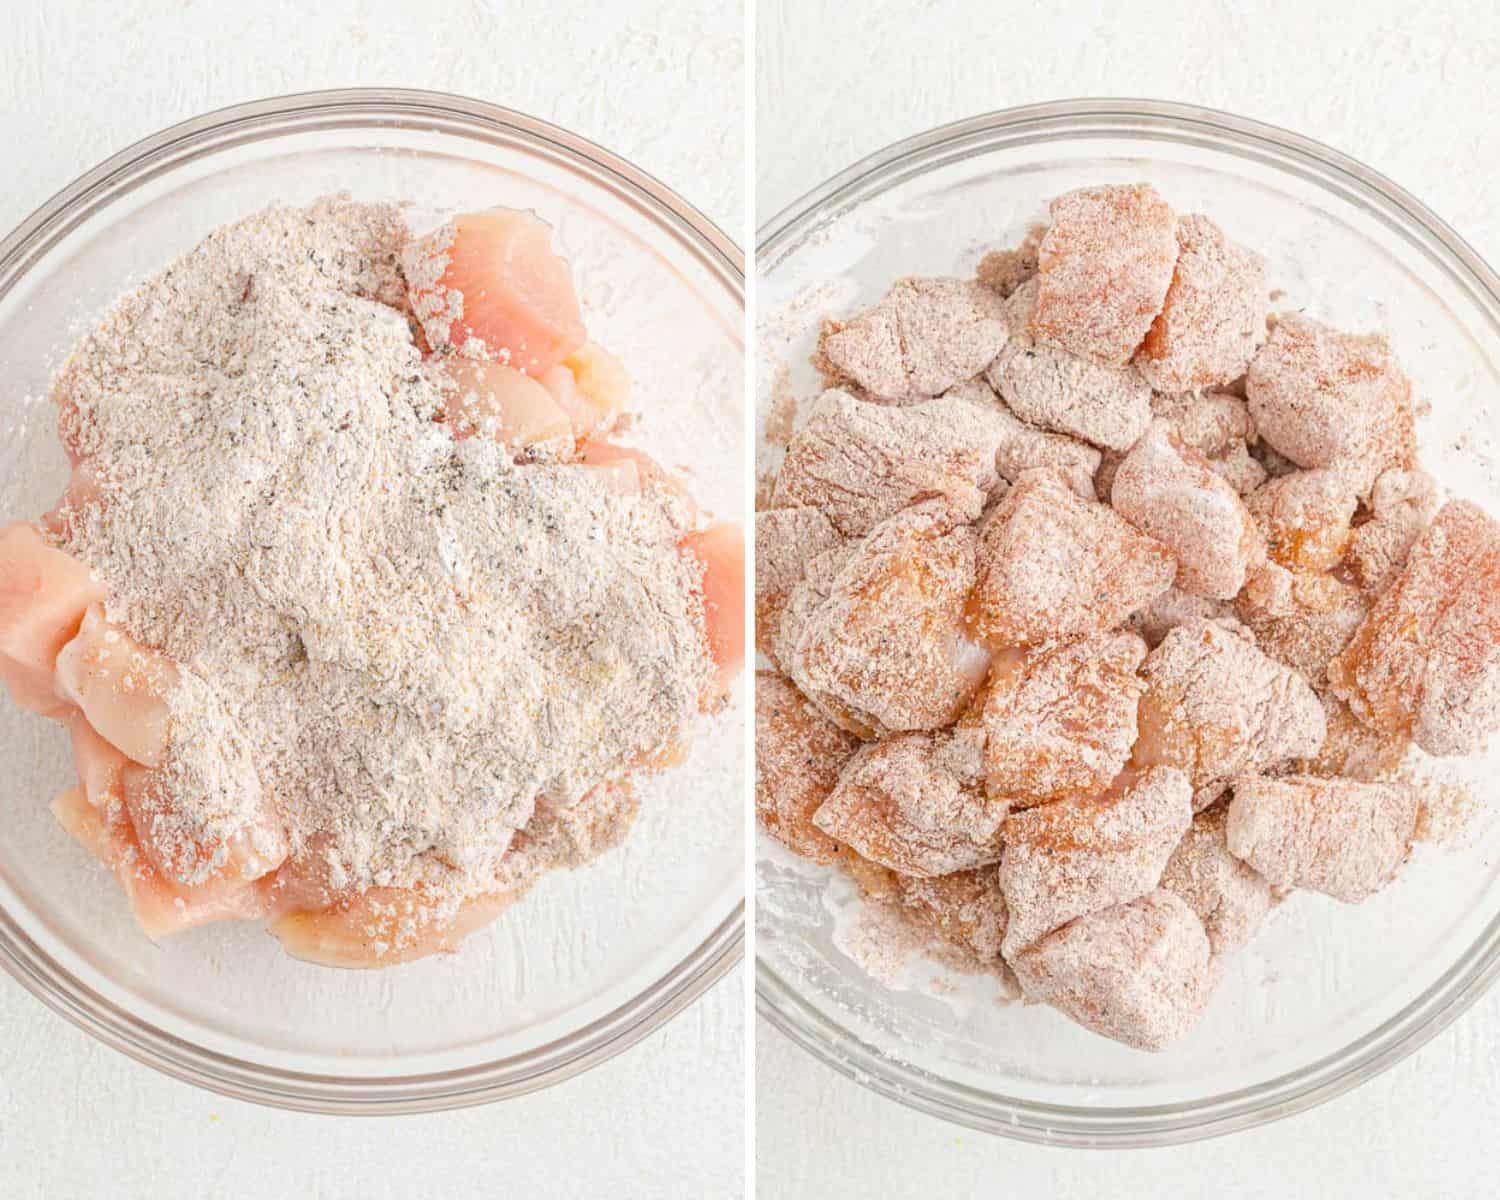 Chicken before and after tossing with spices.